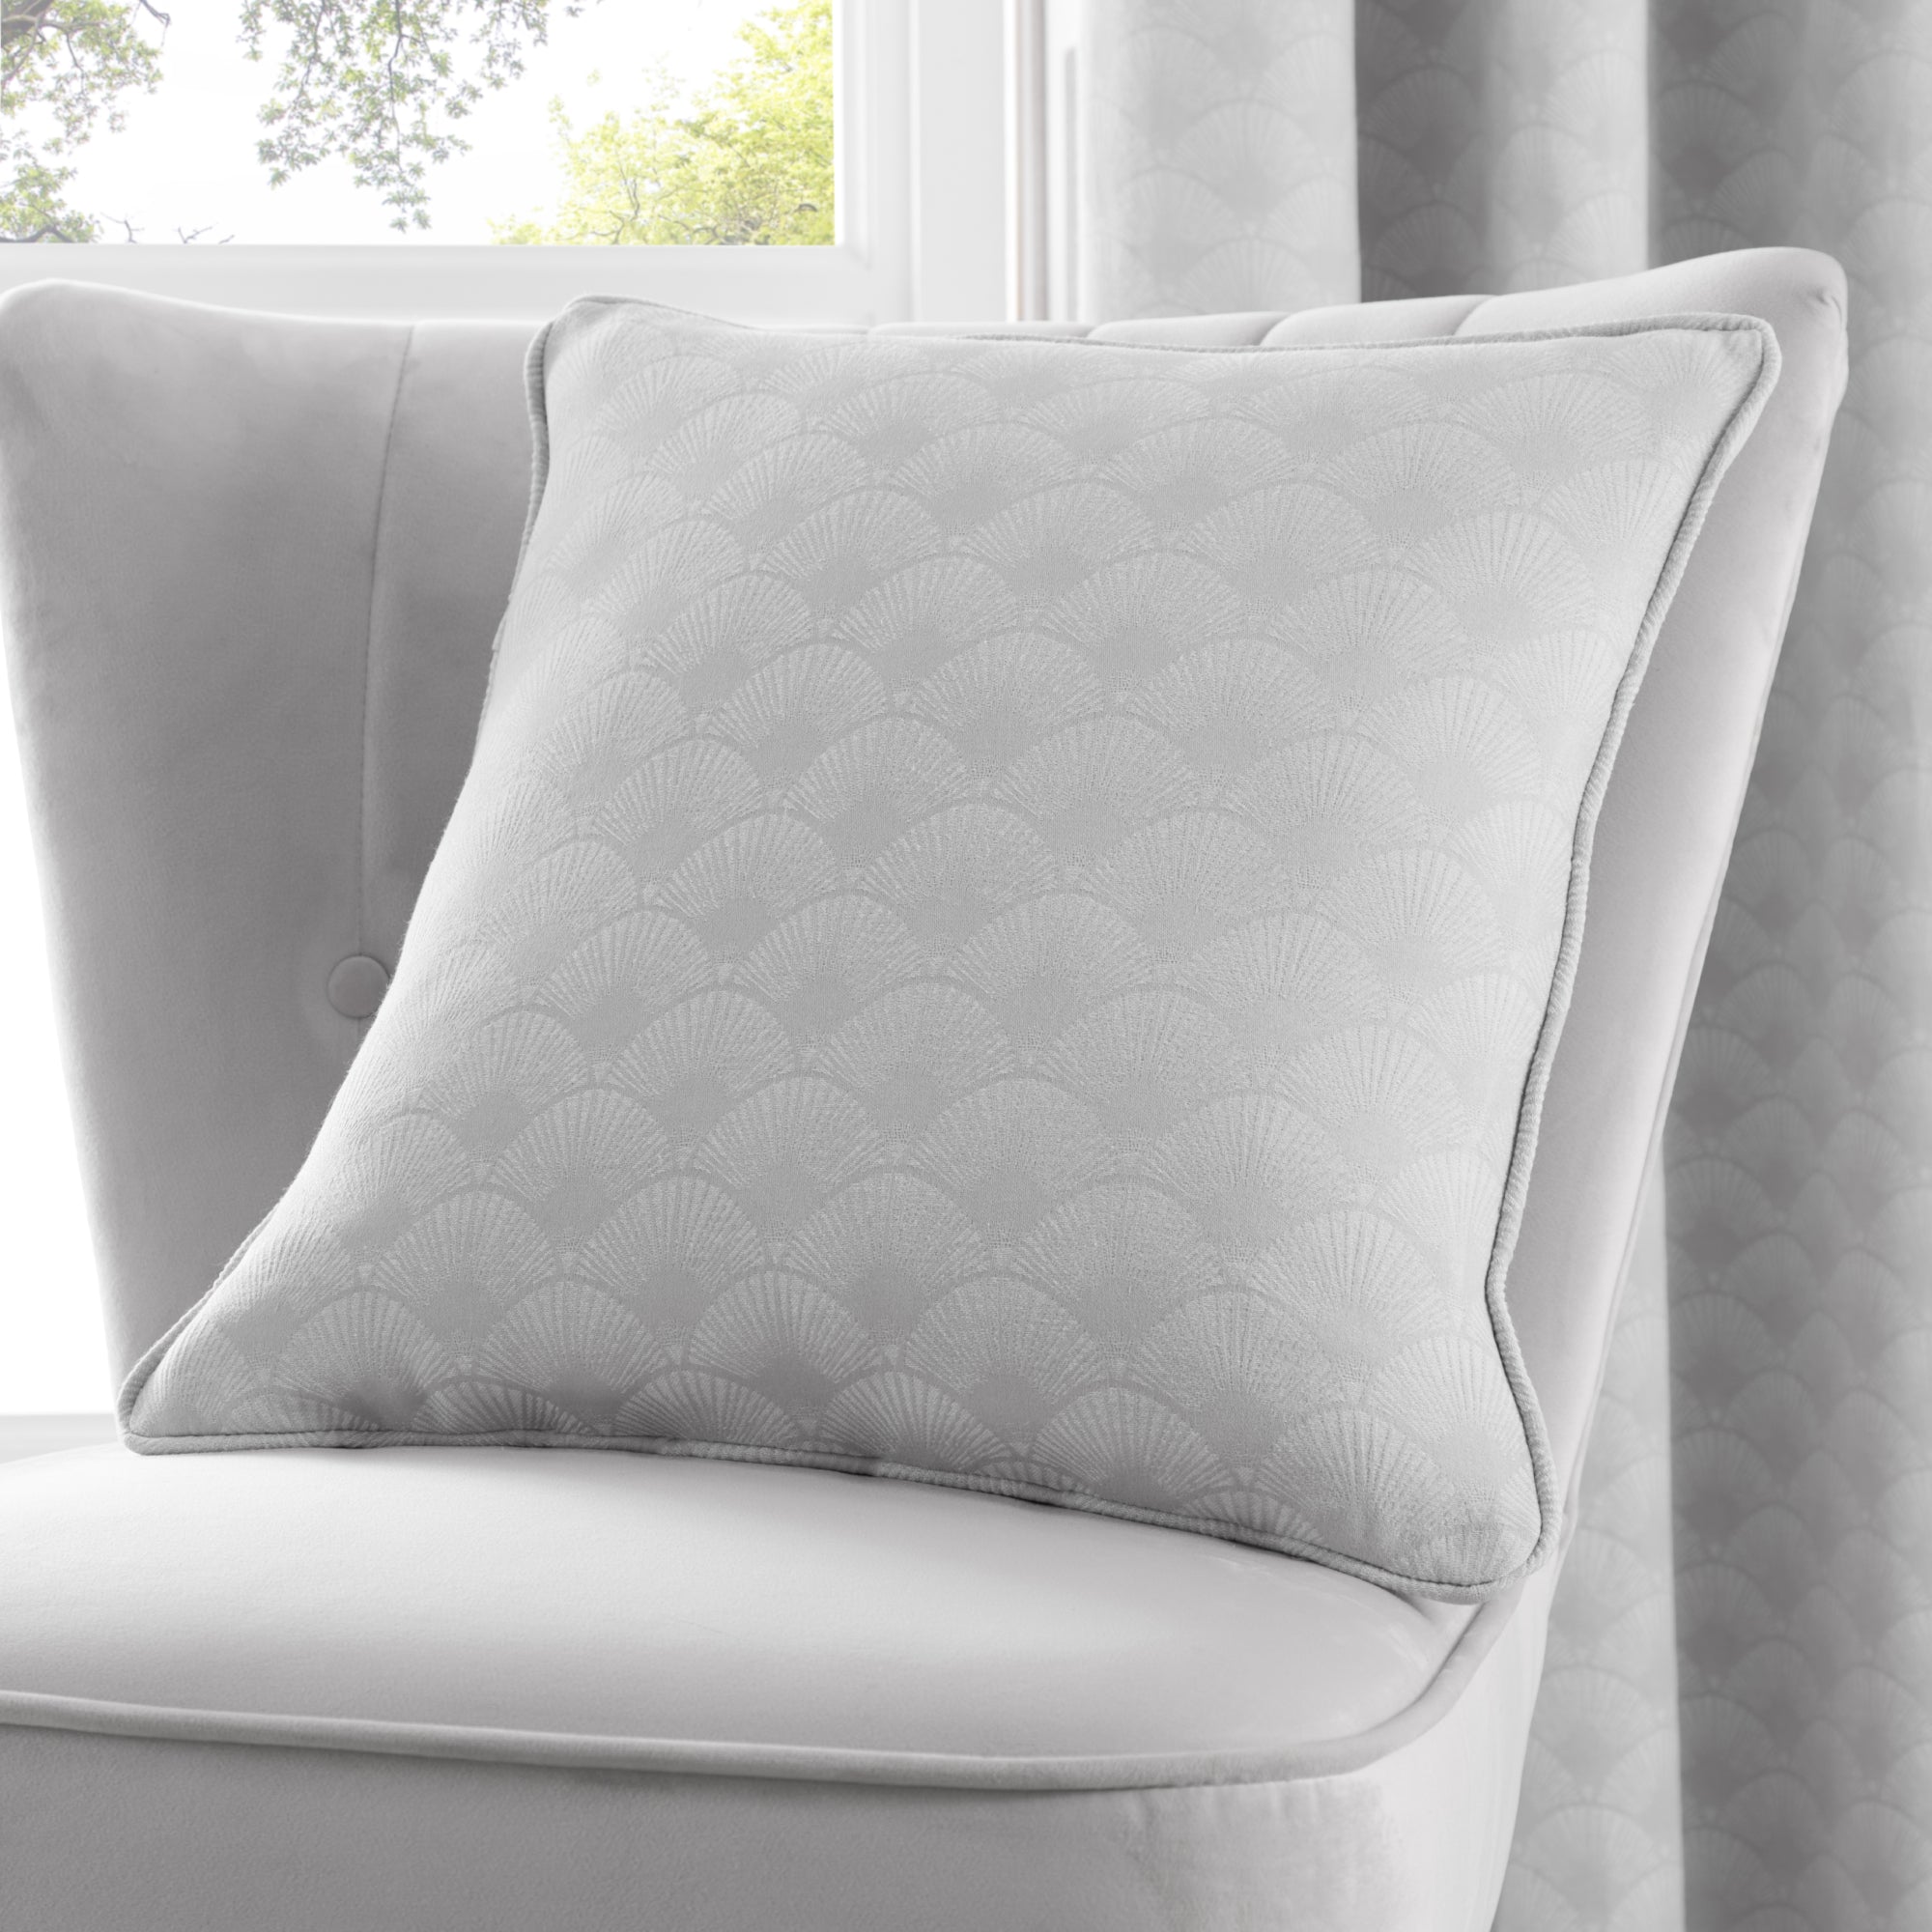 Tiffany - Jacquard Filled Cushion in Silver - by D&D Woven